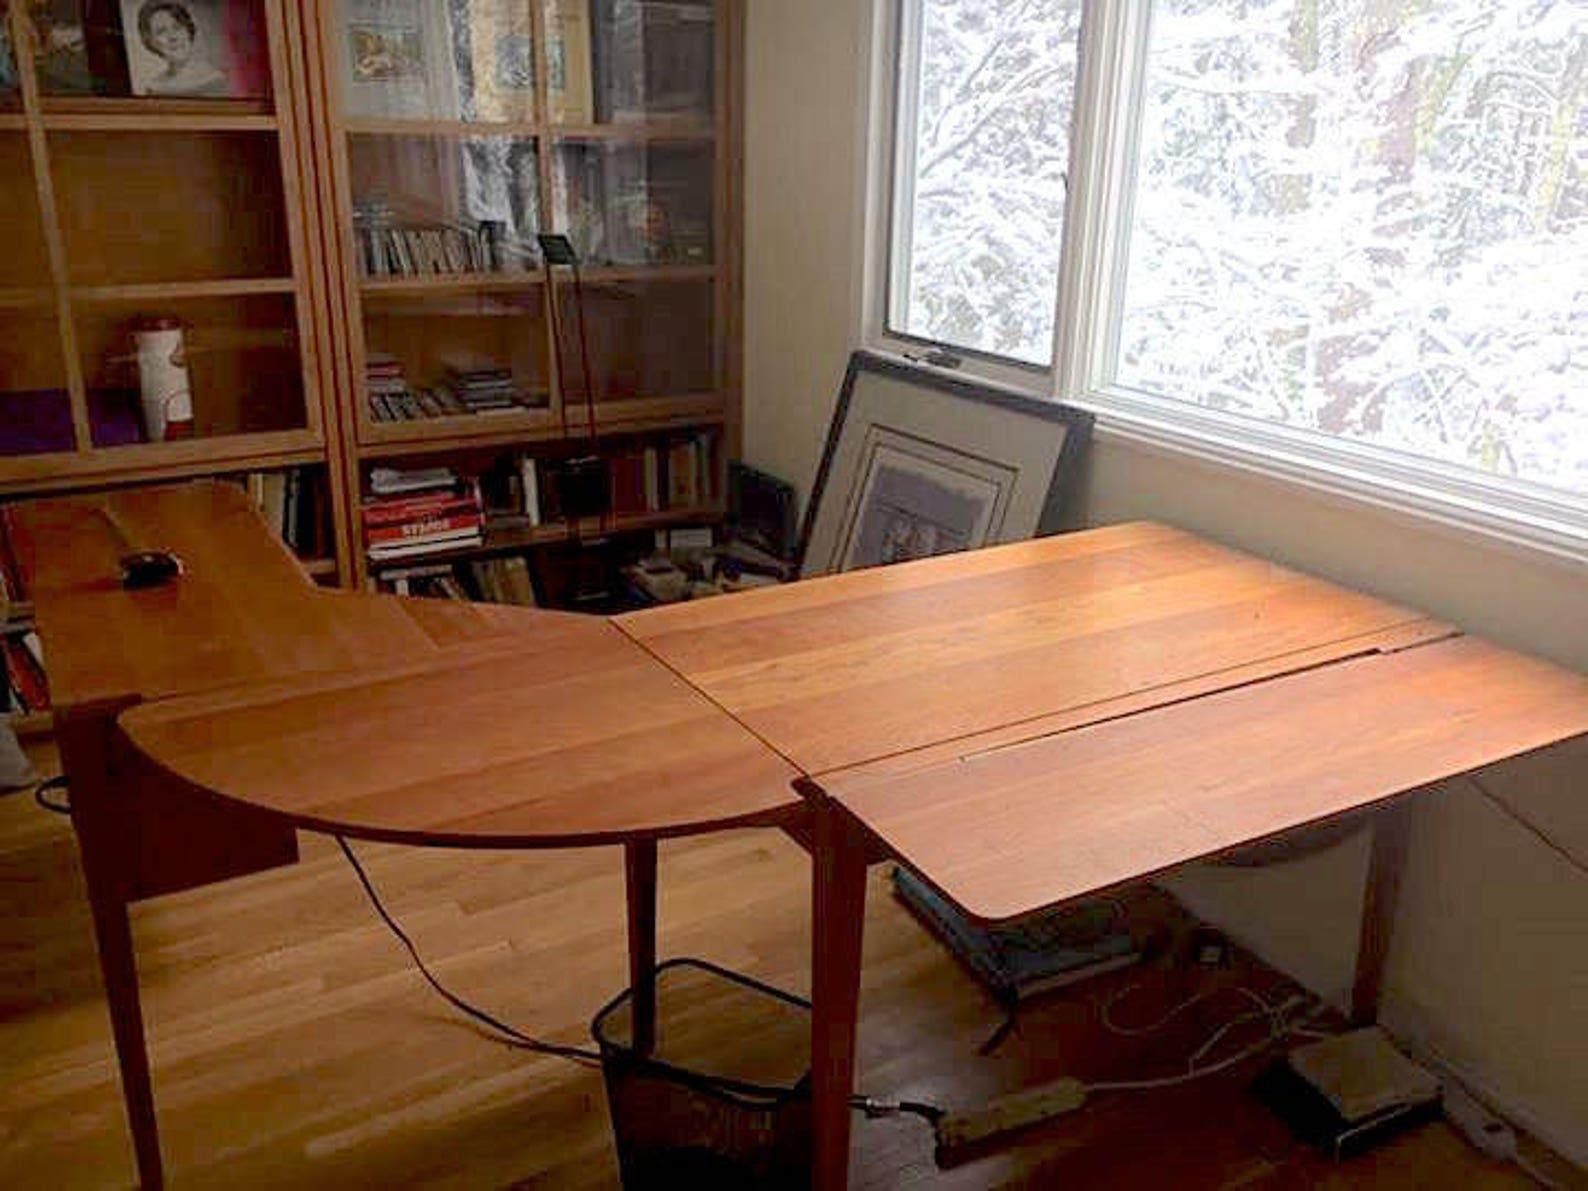 Mid Century Style Desk by Thomas Newhouse for Herman Miller, Danish Modern Design, Three Piece Cherry Wood Desk, in an L shaped design, with an additional flip-up leaf.
The desk has two half moon drop leaves. It measures 70